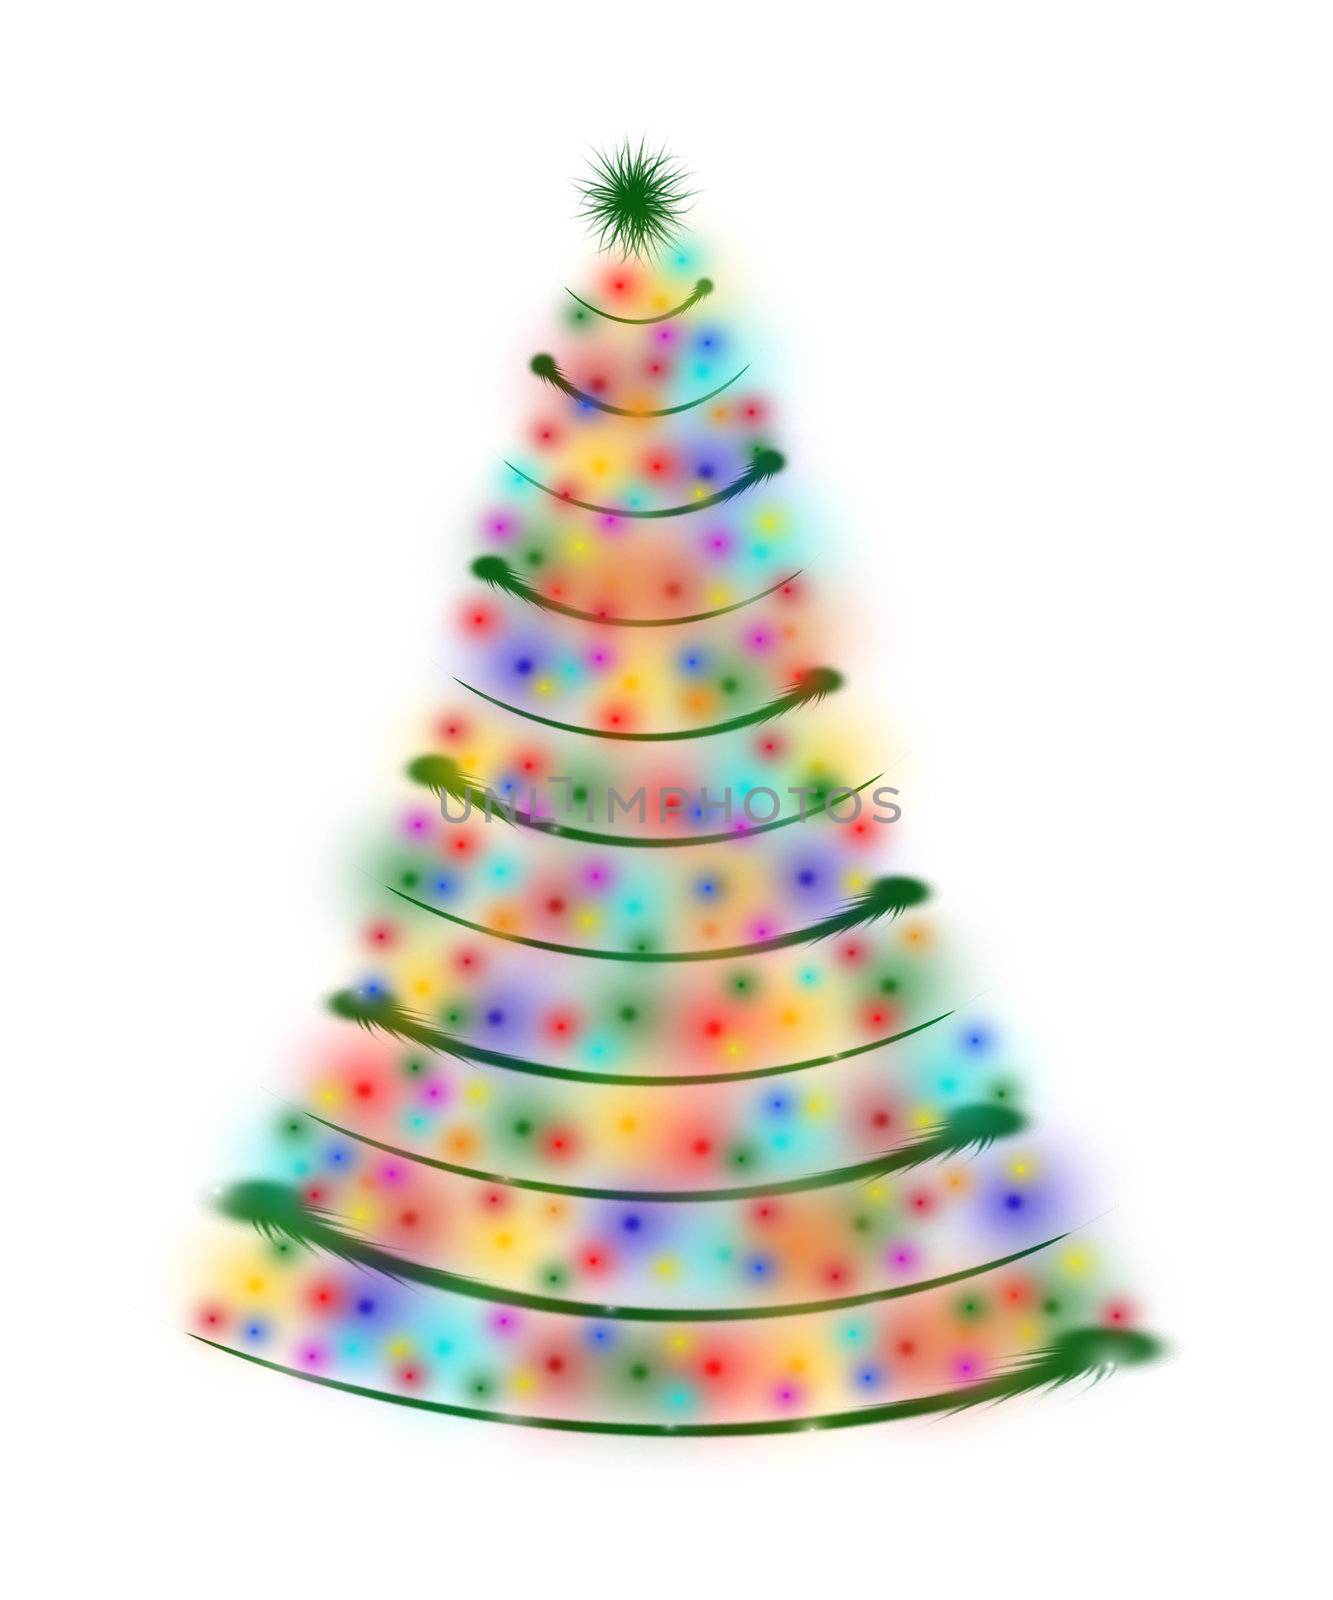 christmas tree drawn by white, red, yellow, orange, pink, violet, green and blue lights isolated
